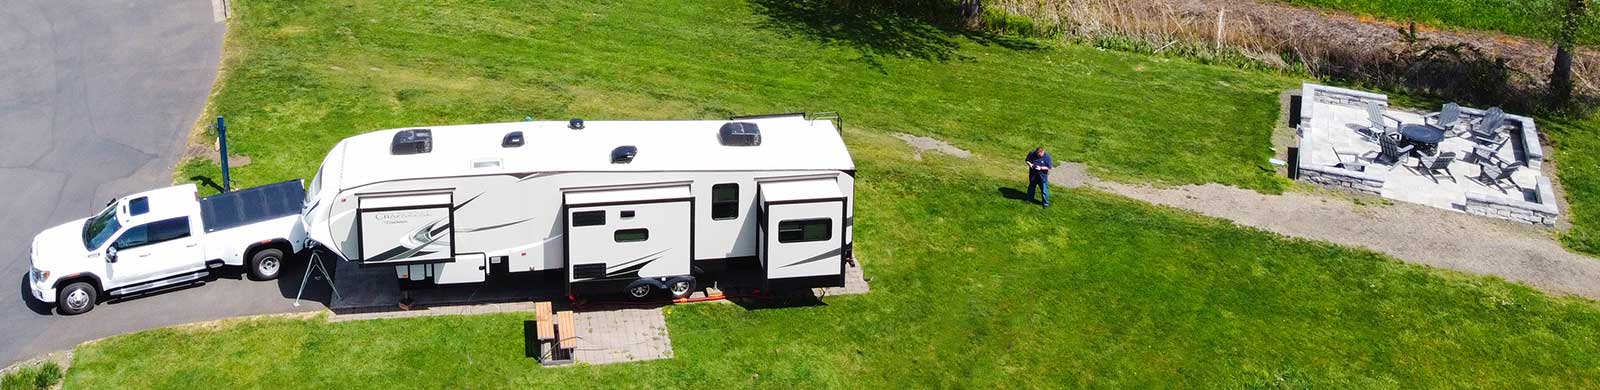 Aerial view of a motorhome taken by a drone flown by our licensed home inspectors